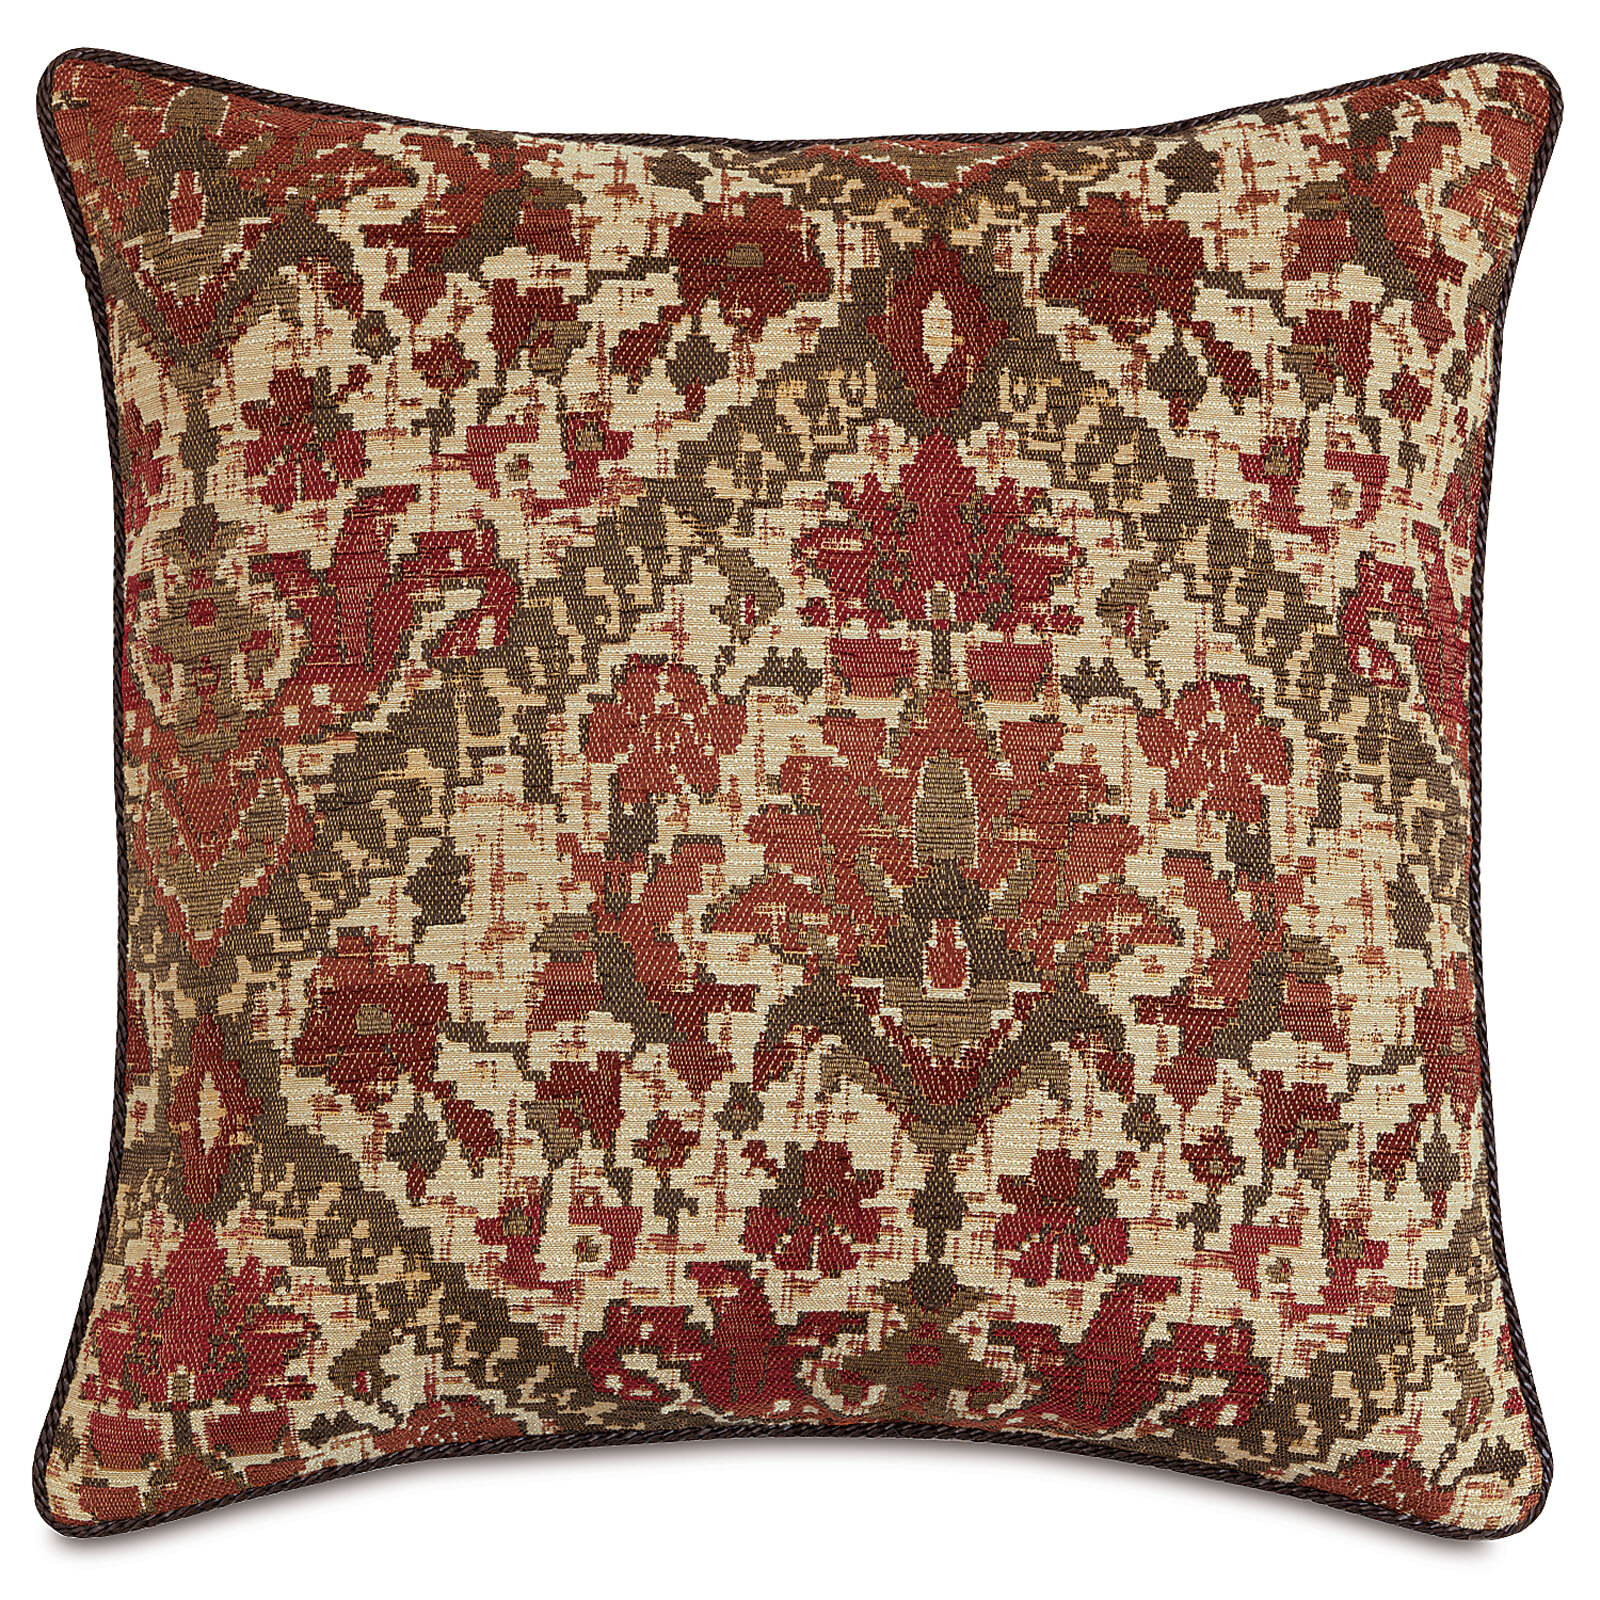 Eastern Accents Chalet Douglas Down Floral Throw Pillow Cover